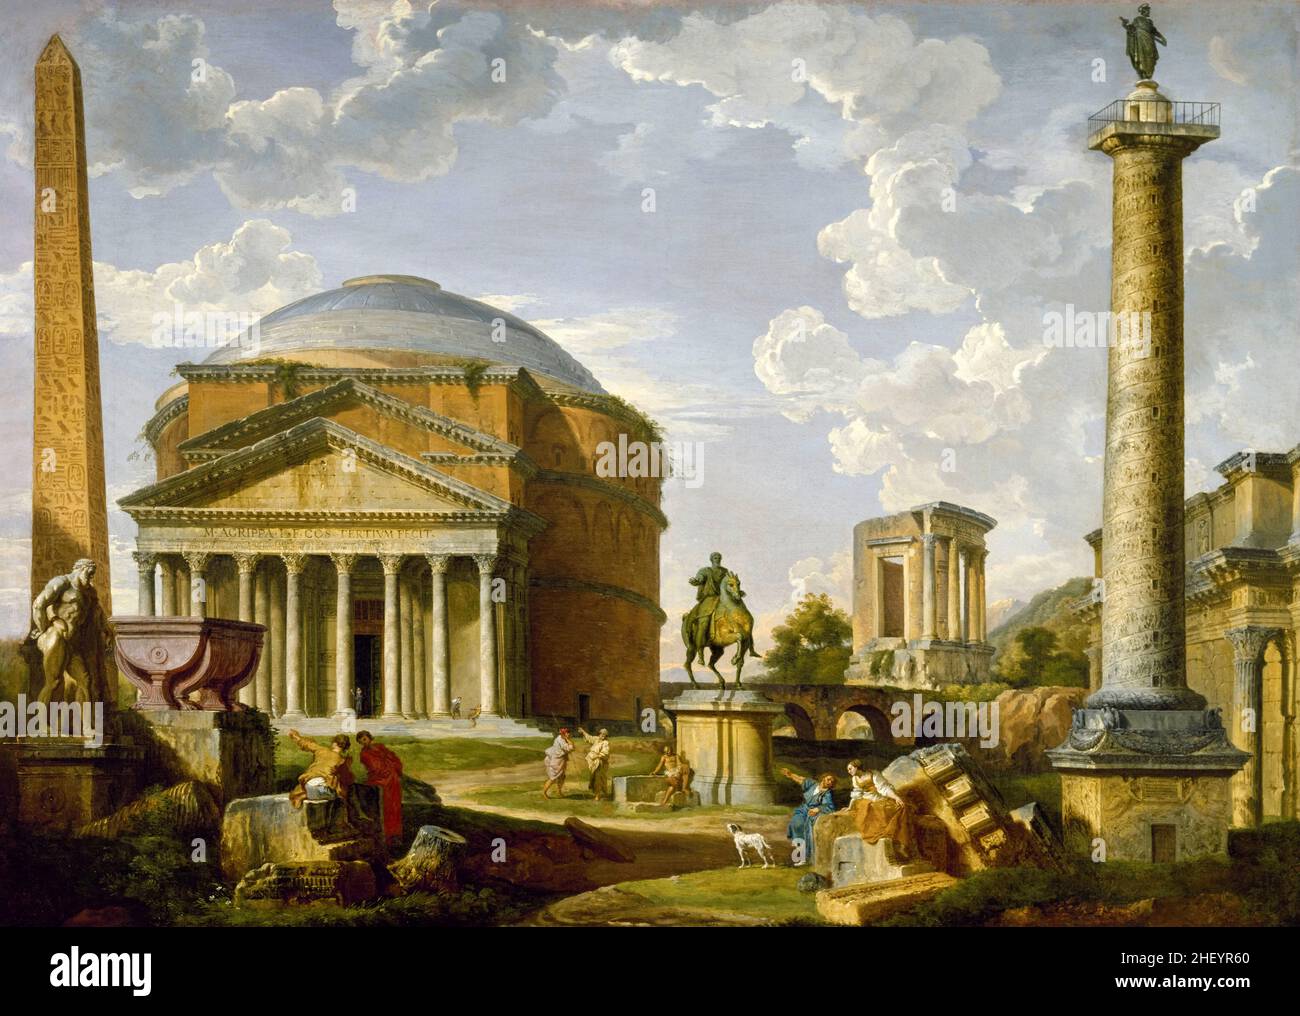 Fantasy View with the Pantheon and other Monuments of Ancient Rome, painting by Giovanni Paolo Panini, 1737 Stock Photo